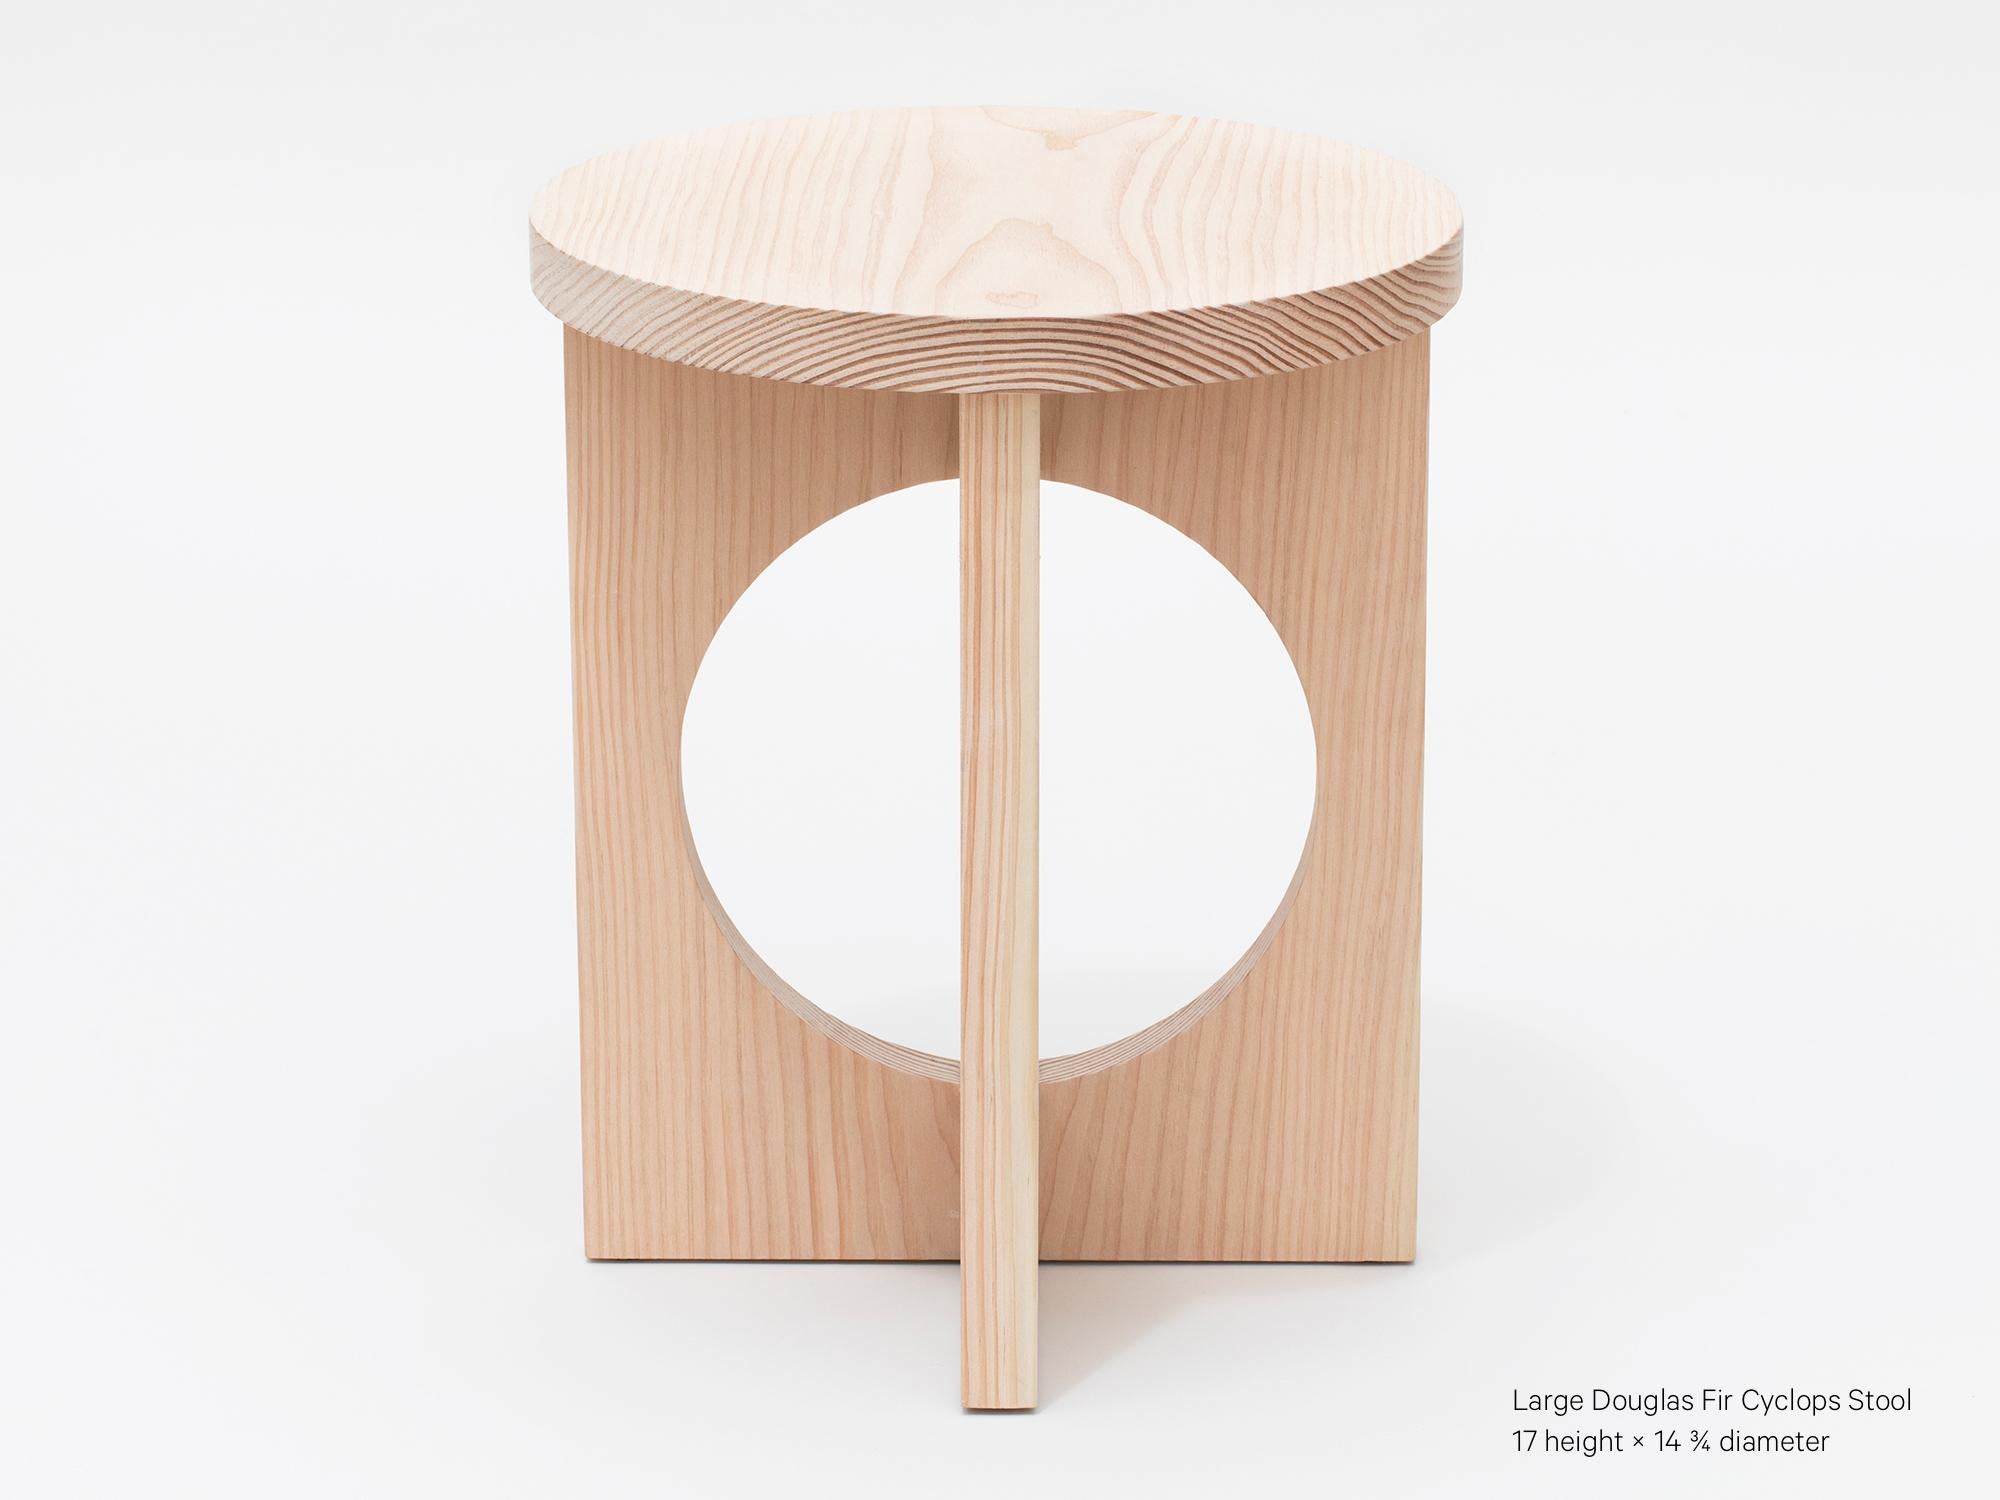 These stunning stools or side tables by Norwegian architect and designer Tron Meyer are made of 3 different woods, ash, Douglas fir and oak. Available stools are in the following sizes and woods:

Large Cyclop stool – 1 oak, 1 ash, 1 Douglas fir